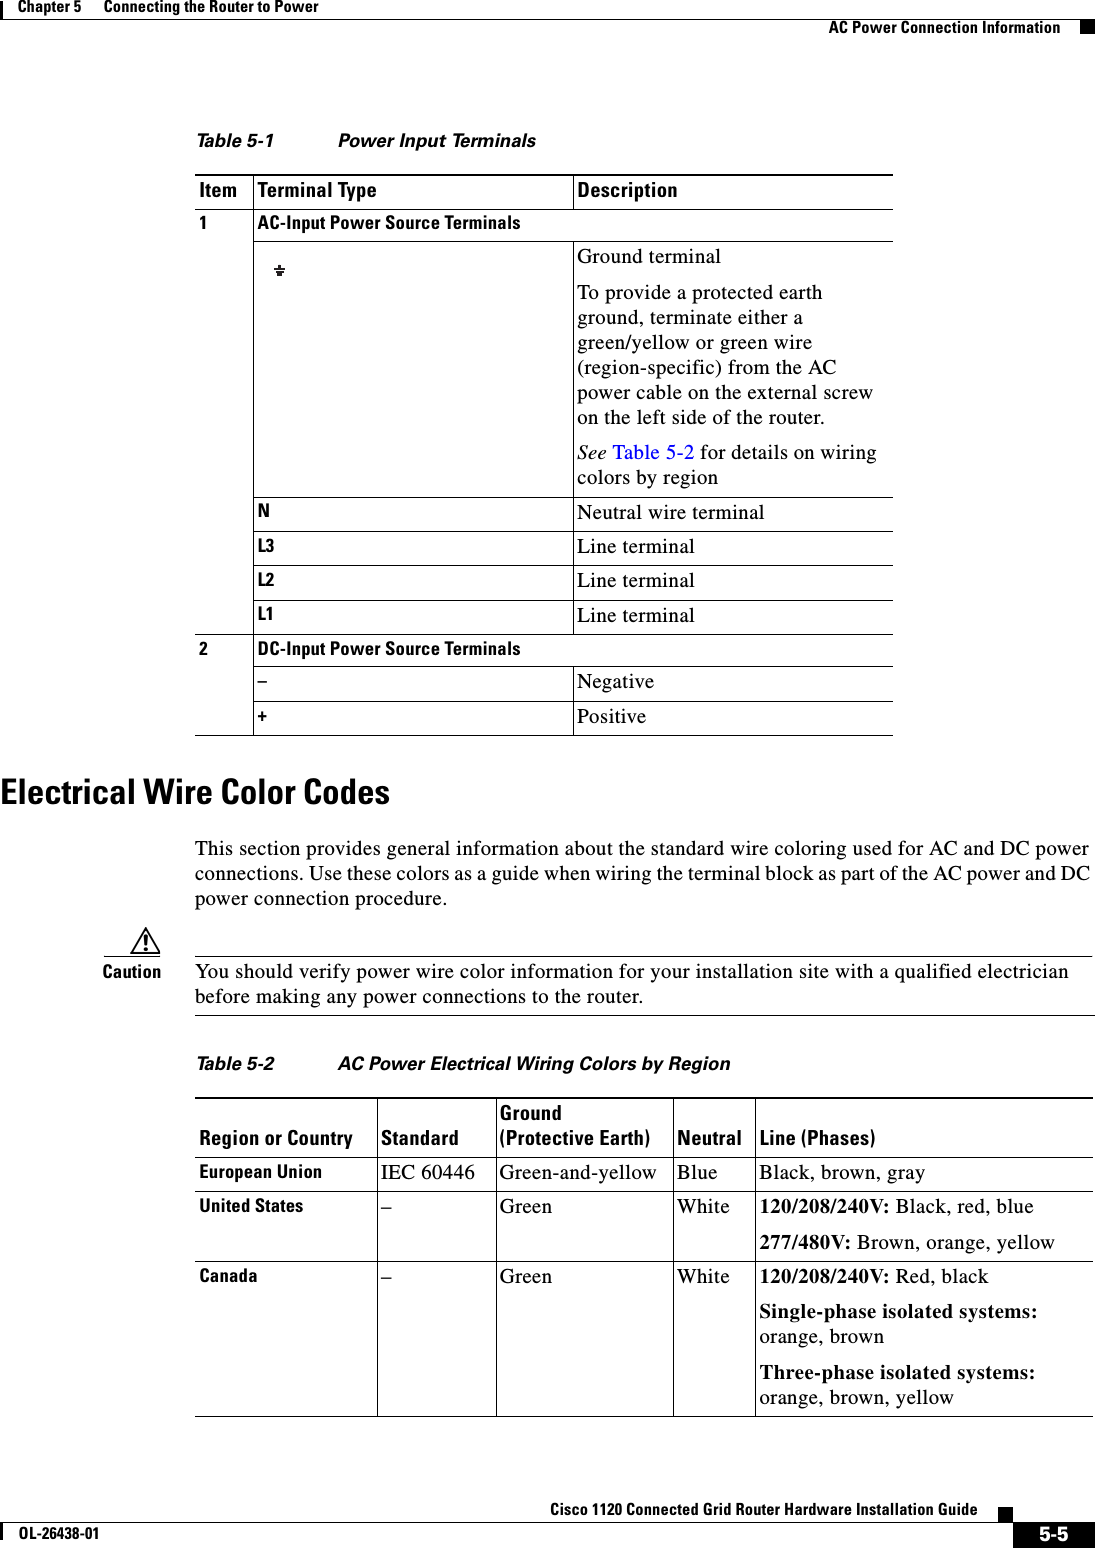  5-5Cisco 1120 Connected Grid Router Hardware Installation GuideOL-26438-01Chapter 5      Connecting the Router to Power  AC Power Connection InformationElectrical Wire Color CodesThis section provides general information about the standard wire coloring used for AC and DC power connections. Use these colors as a guide when wiring the terminal block as part of the AC power and DC power connection procedure.Caution You should verify power wire color information for your installation site with a qualified electrician before making any power connections to the router.Table 5-1 Power Input Terminals Item Terminal Type Description1 AC-Input Power Source TerminalsGround terminalTo provide a protected earth ground, terminate either a green/yellow or green wire (region-specific) from the AC power cable on the external screw on the left side of the router.See Table 5-2 for details on wiring colors by regionNNeutral wire terminalL3 Line terminalL2 Line terminalL1 Line terminal2 DC-Input Power Source Terminals–Negative+PositiveTable 5-2 AC Power Electrical Wiring Colors by RegionRegion or Country StandardGround(Protective Earth) Neutral Line (Phases)European Union IEC 60446 Green-and-yellow Blue Black, brown, grayUnited States – Green White 120/208/240V: Black, red, blue277/480V: Brown, orange, yellow Canada – Green White 120/208/240V: Red, blackSingle-phase isolated systems: orange, brownThree-phase isolated systems: orange, brown, yellow